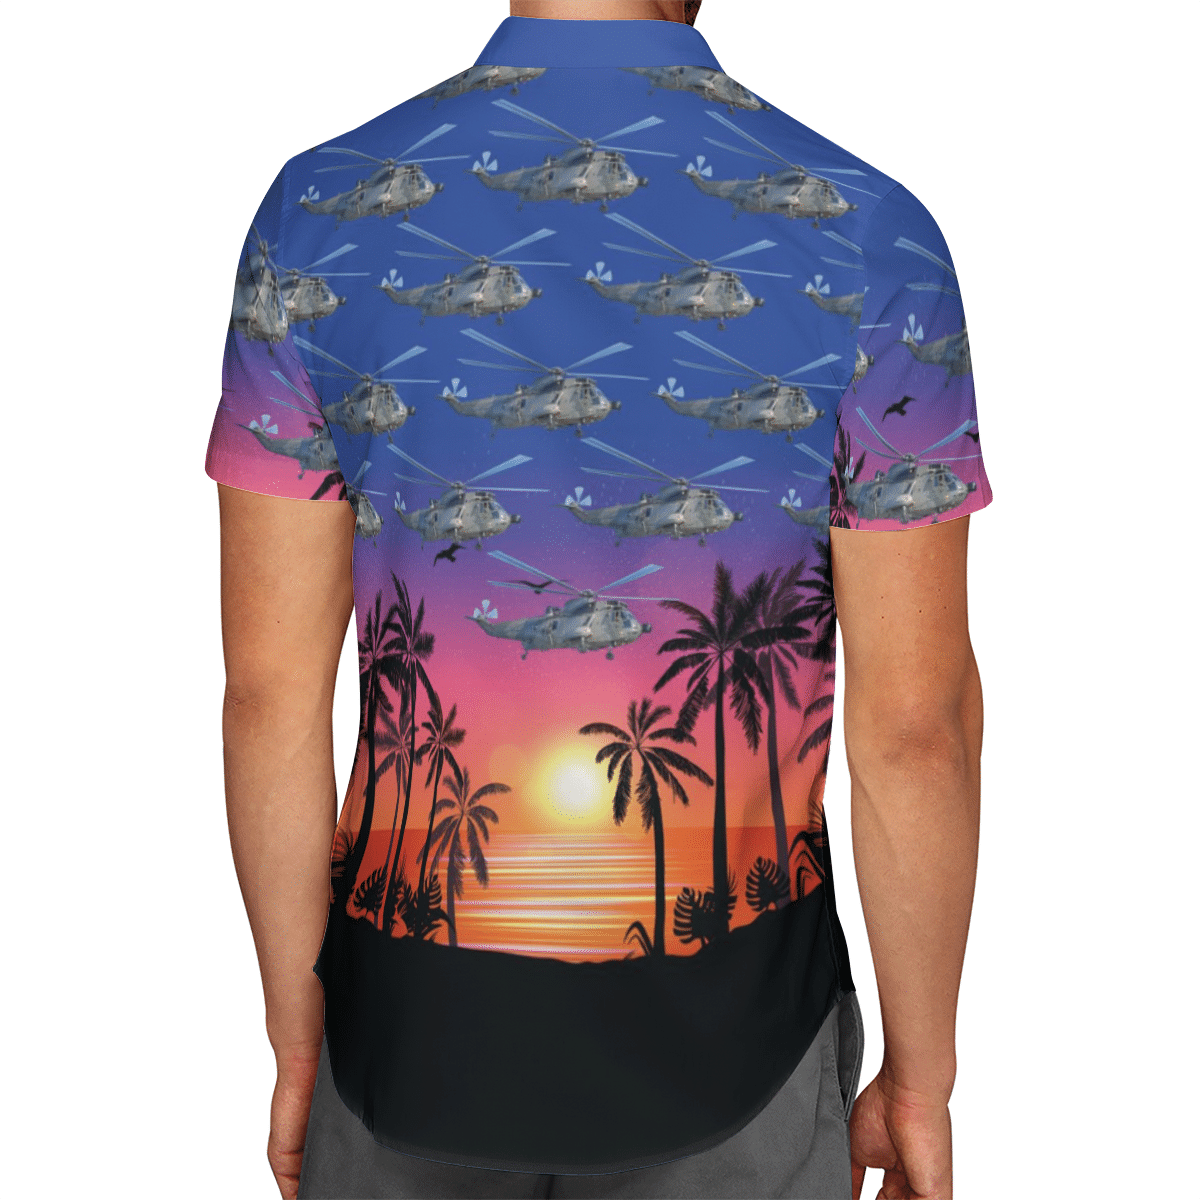 Going to the beach with a quality shirt 14